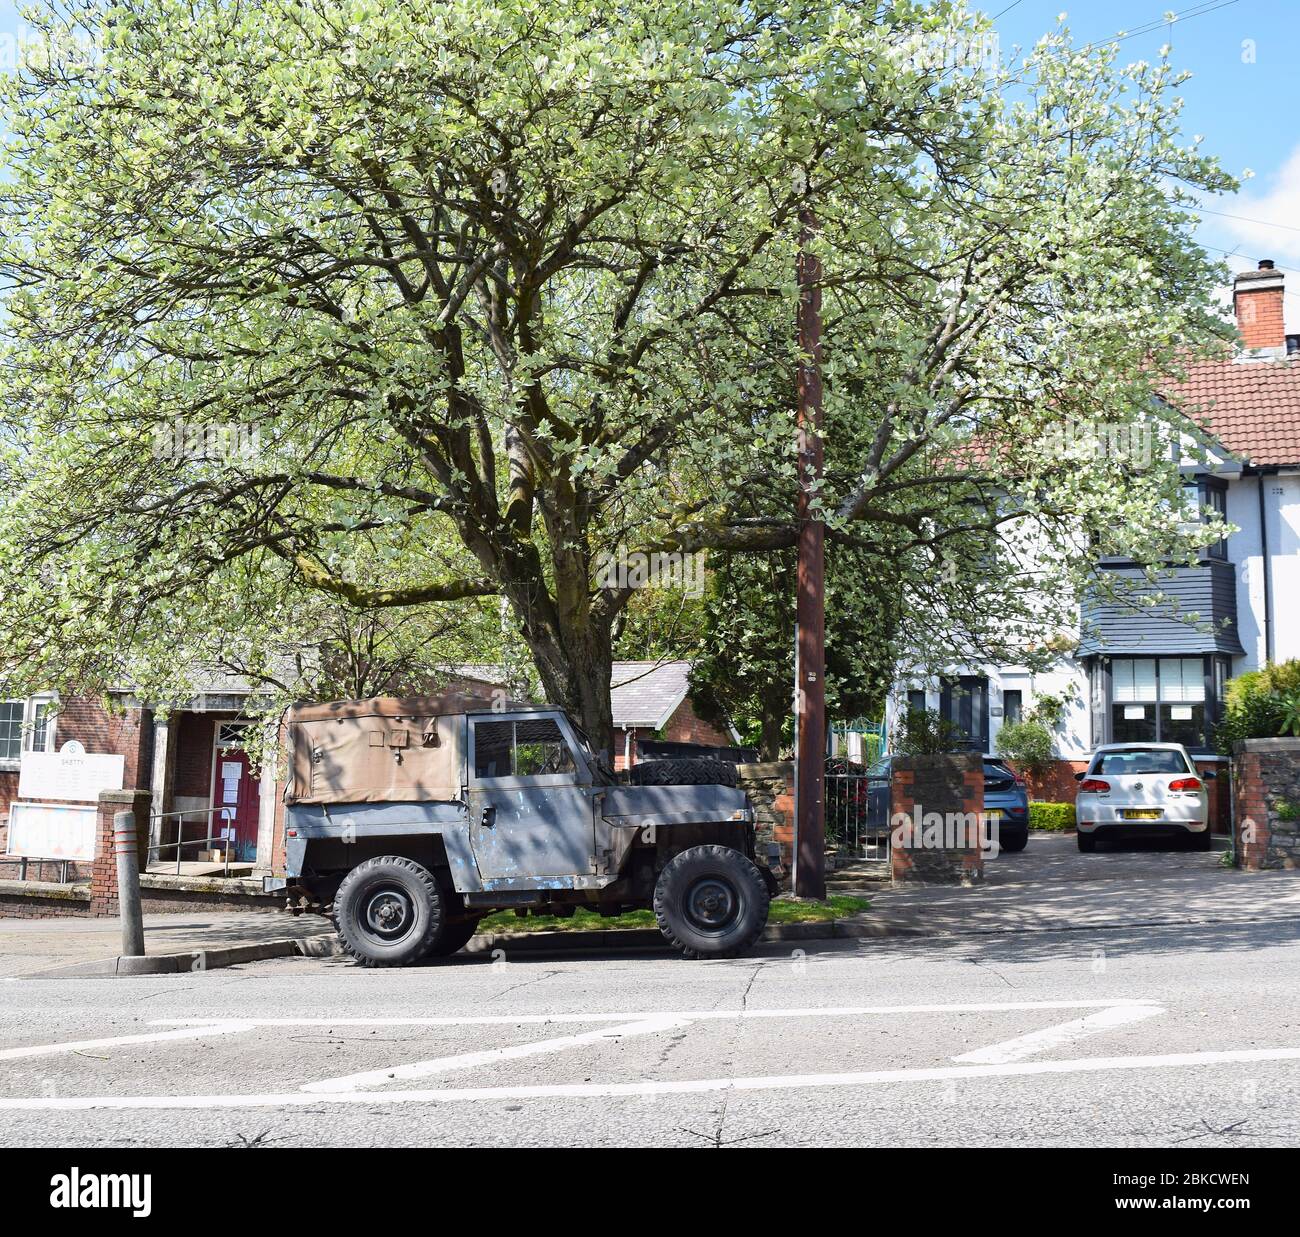 Old Land Rover car parked on the residential street on a sunny day. Stock Photo